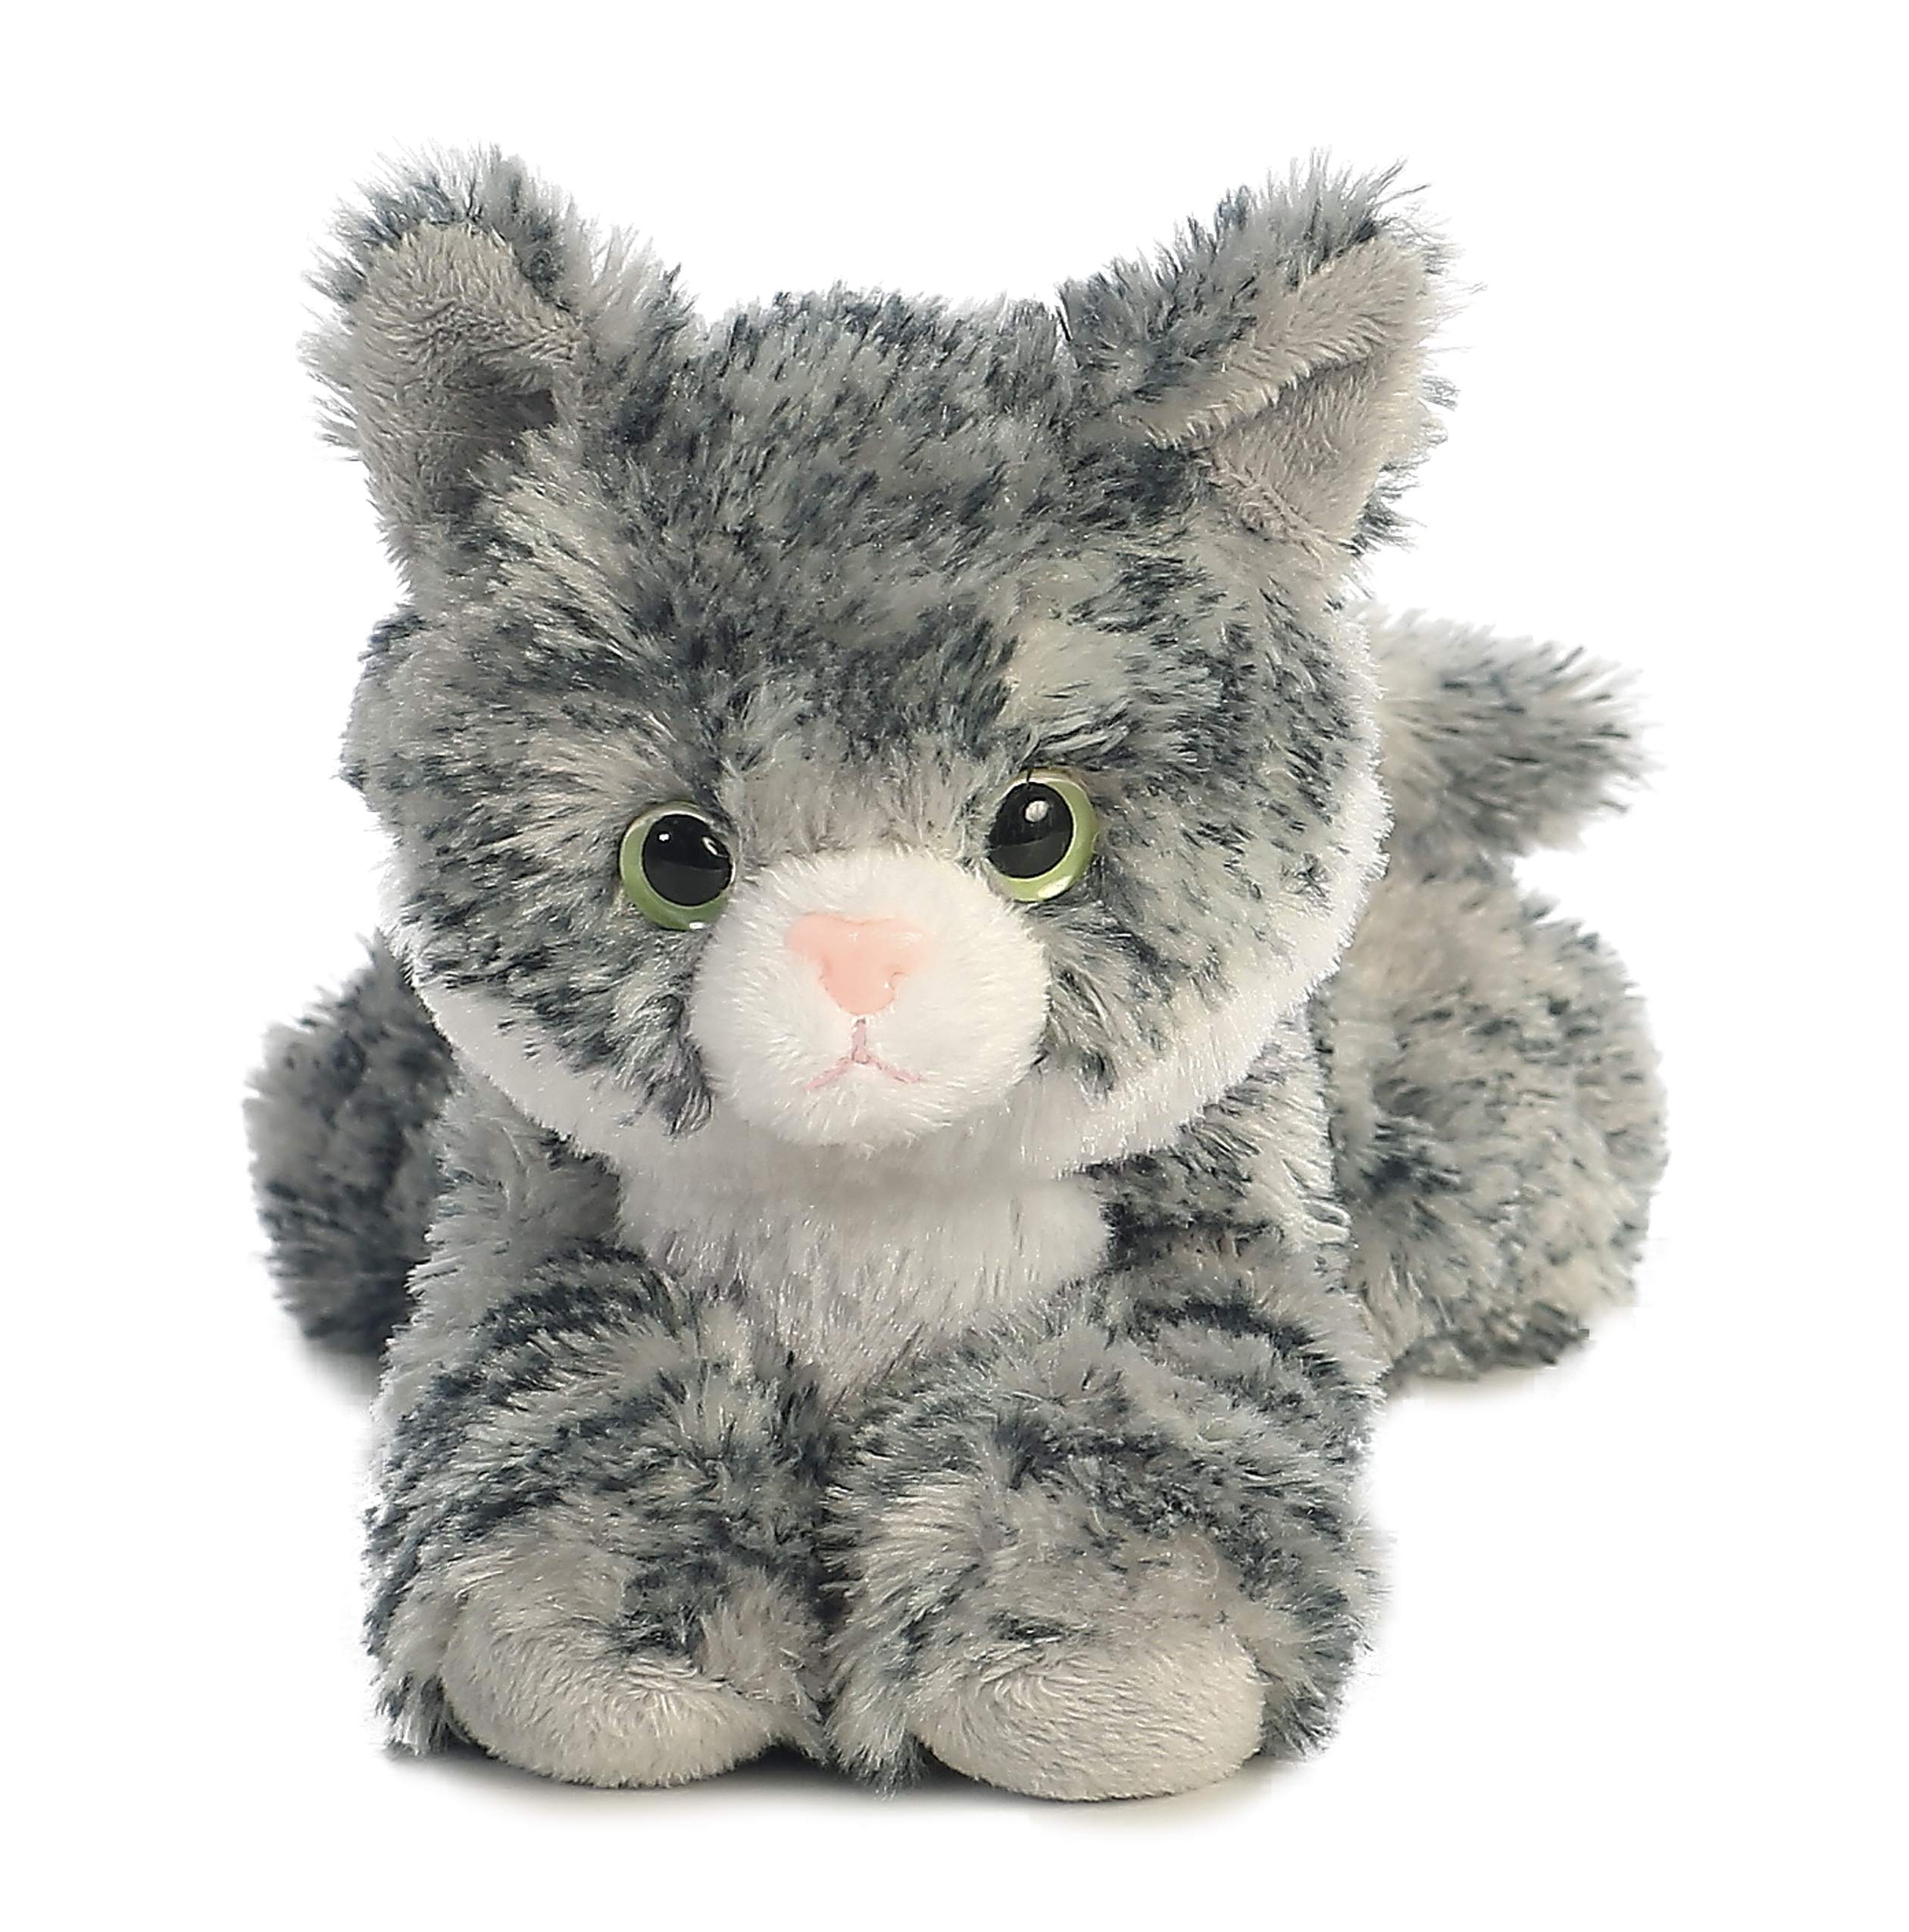 Aurora® Adorable Mini Flopsie™ Lily™ Stuffed Animal - Playful Ease - Timeless Companions - Gray 8 Inches